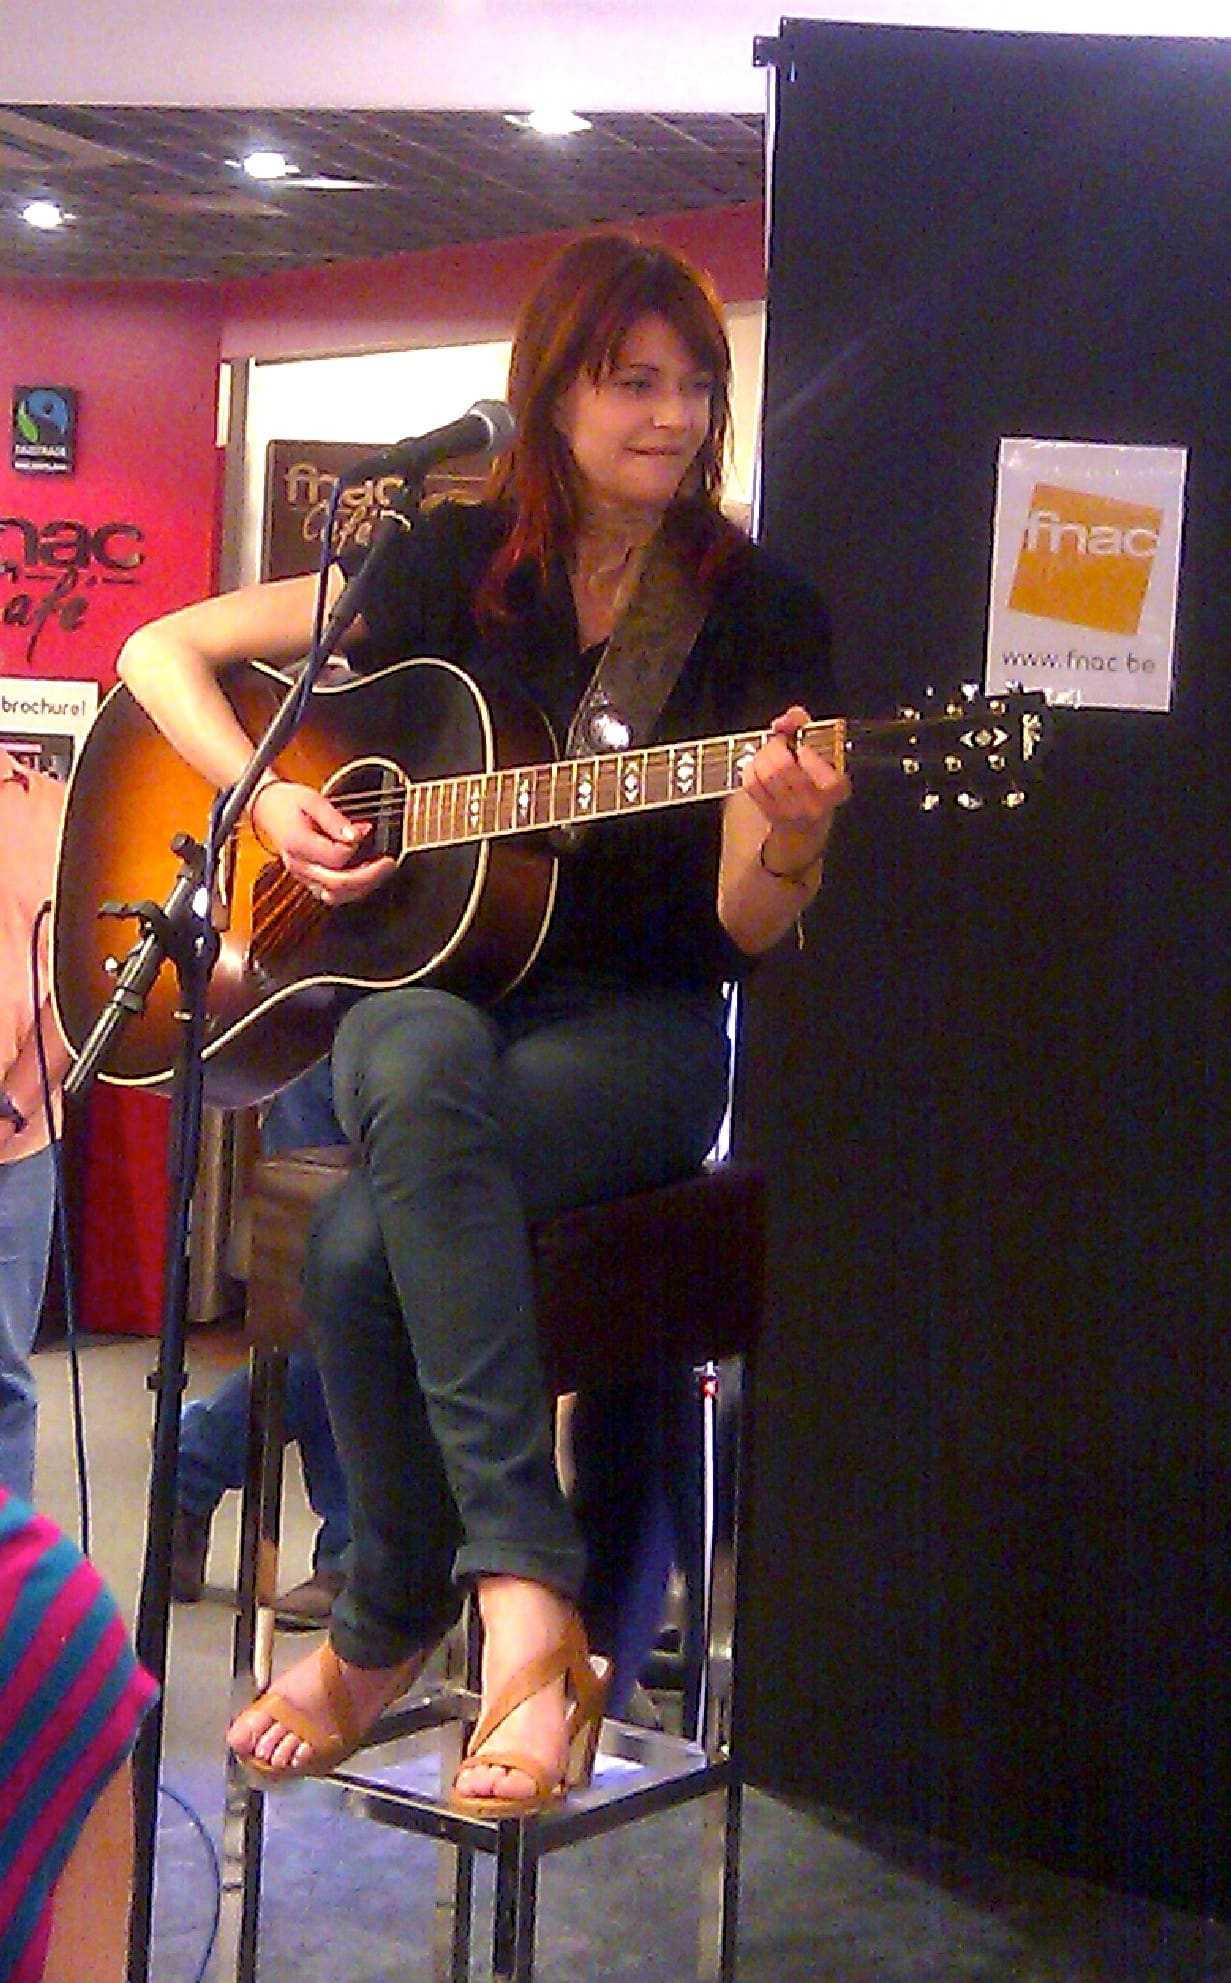 Axelle red concert in Fnac